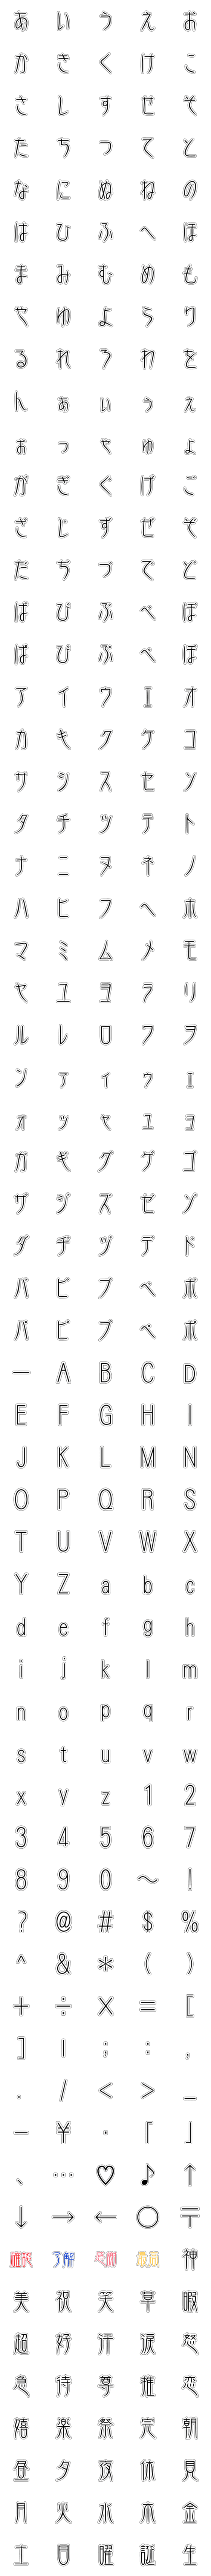 [LINE絵文字]DF金文体 フォント絵文字の画像一覧